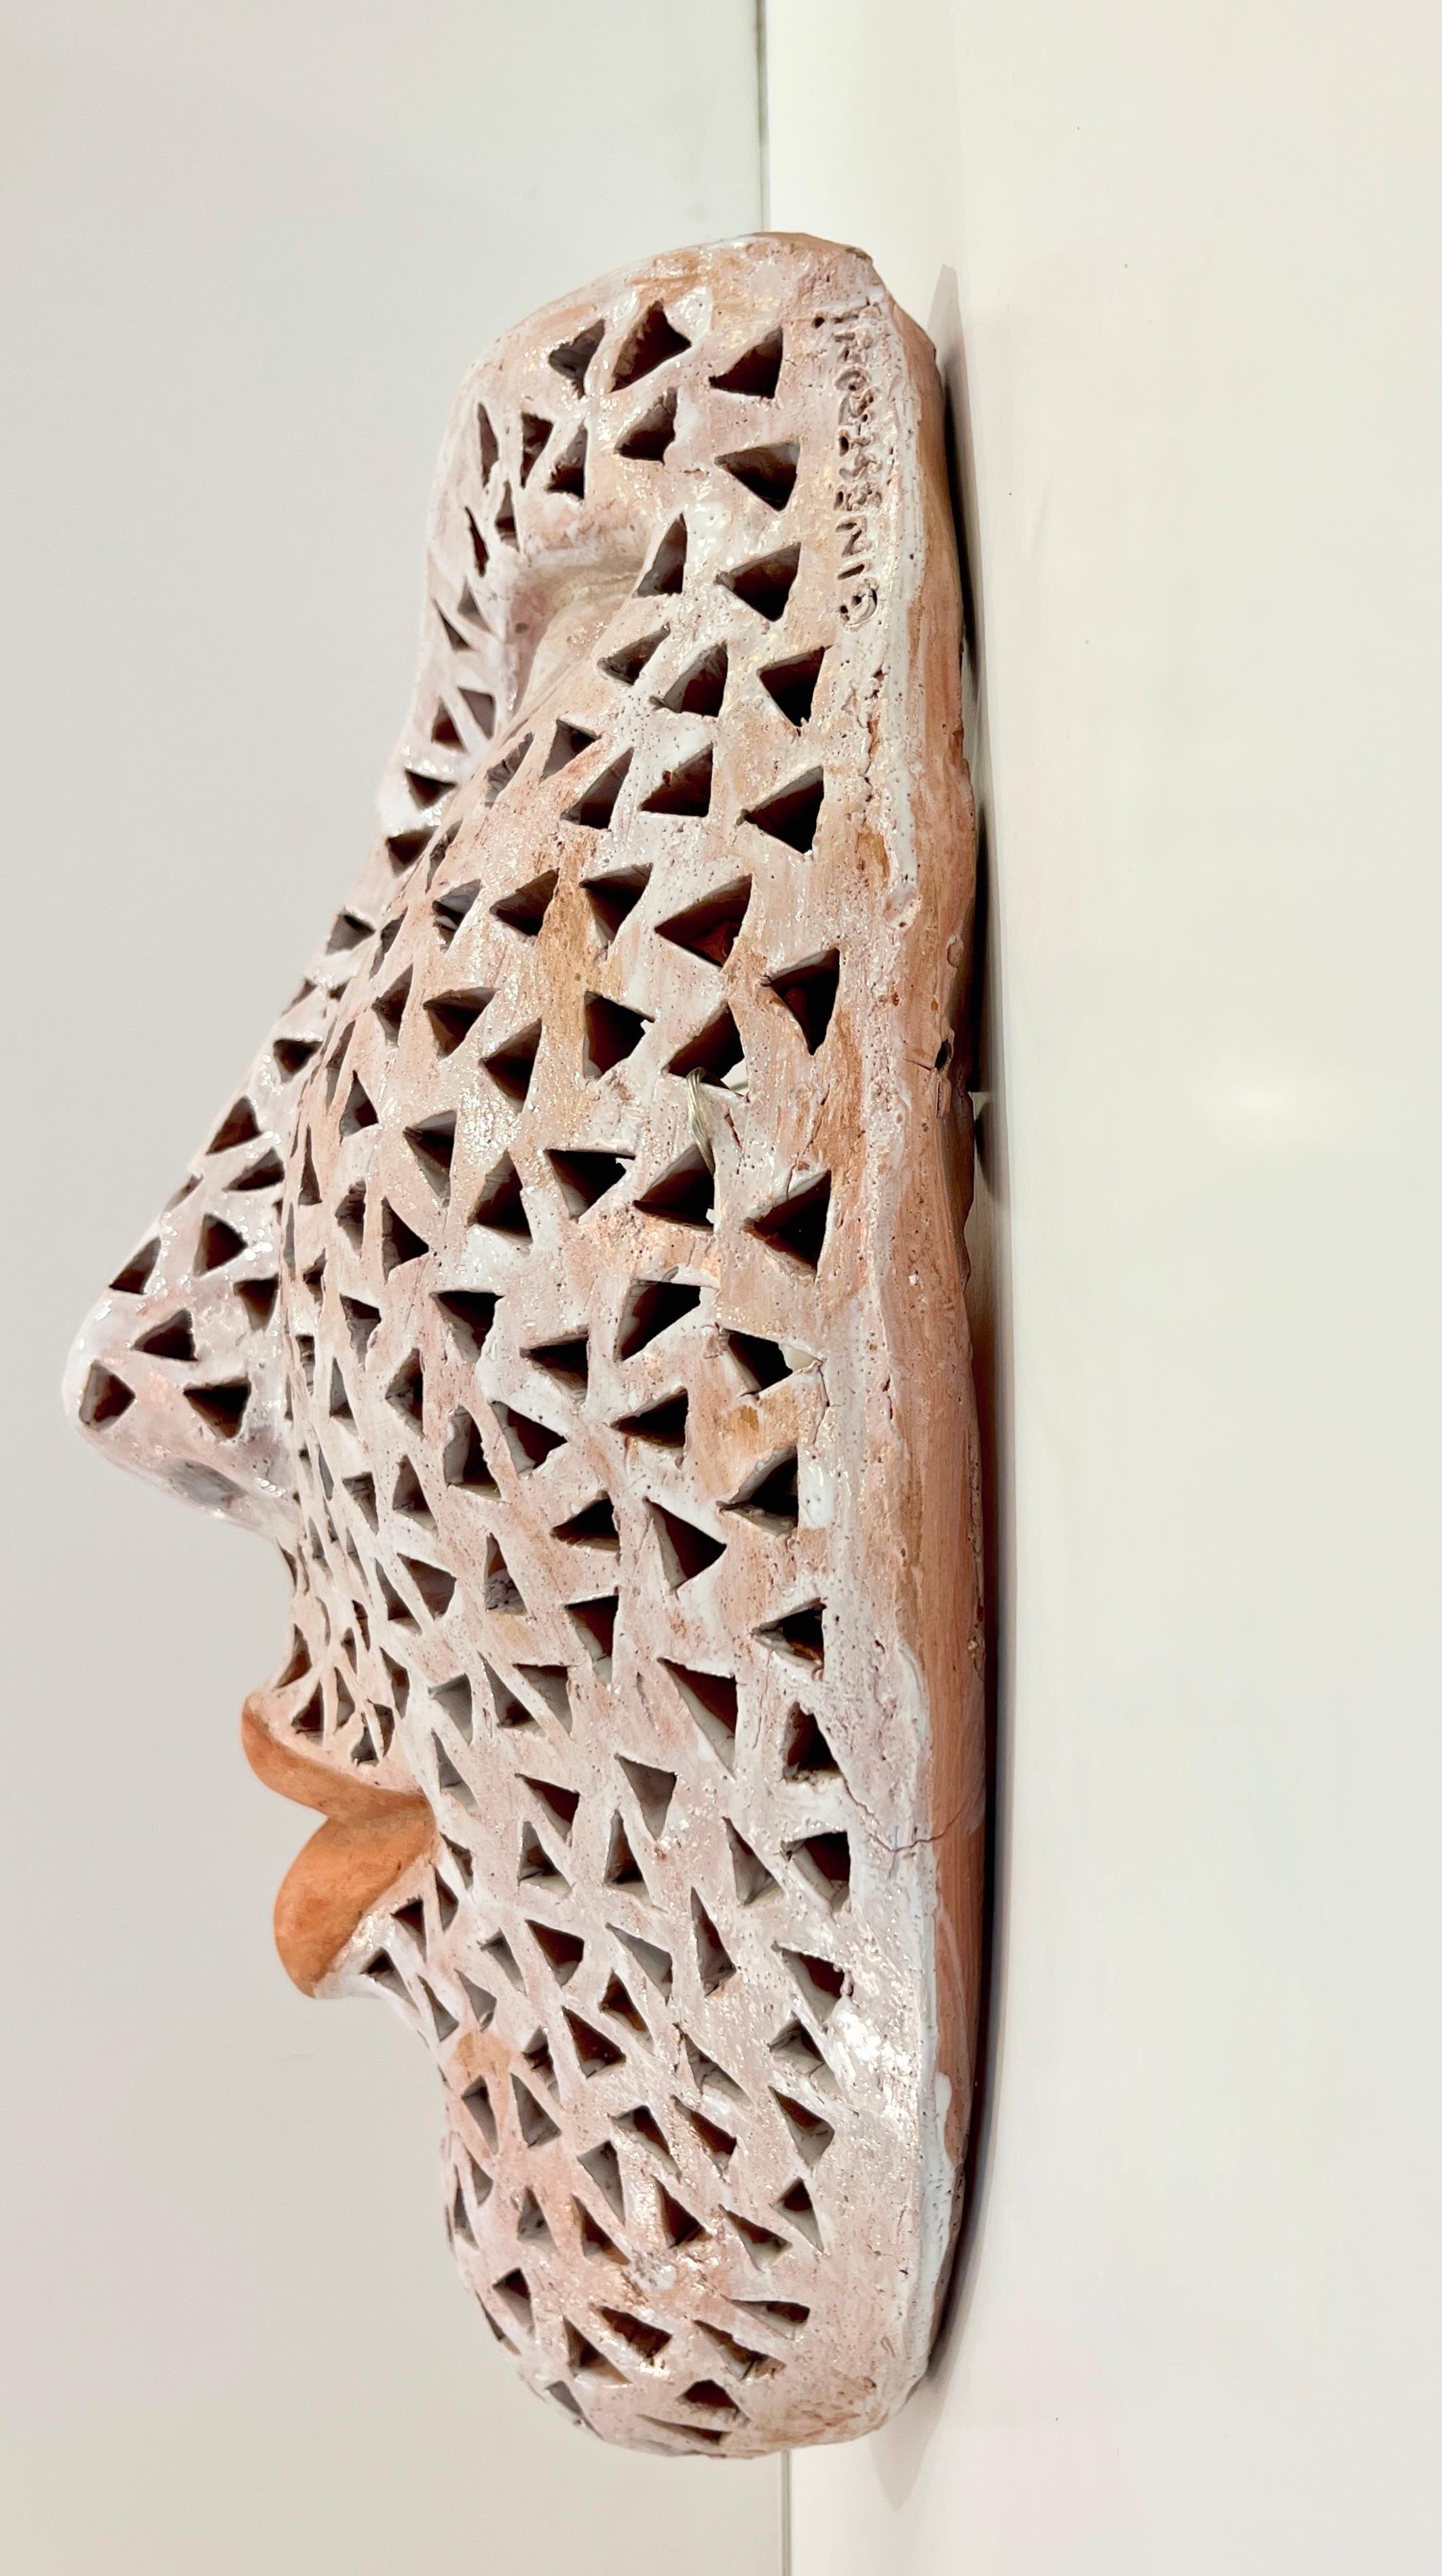 Organic Modern Italian Modern Perforated White Enameled Terracotta Wall Sculpture by Ginestroni For Sale